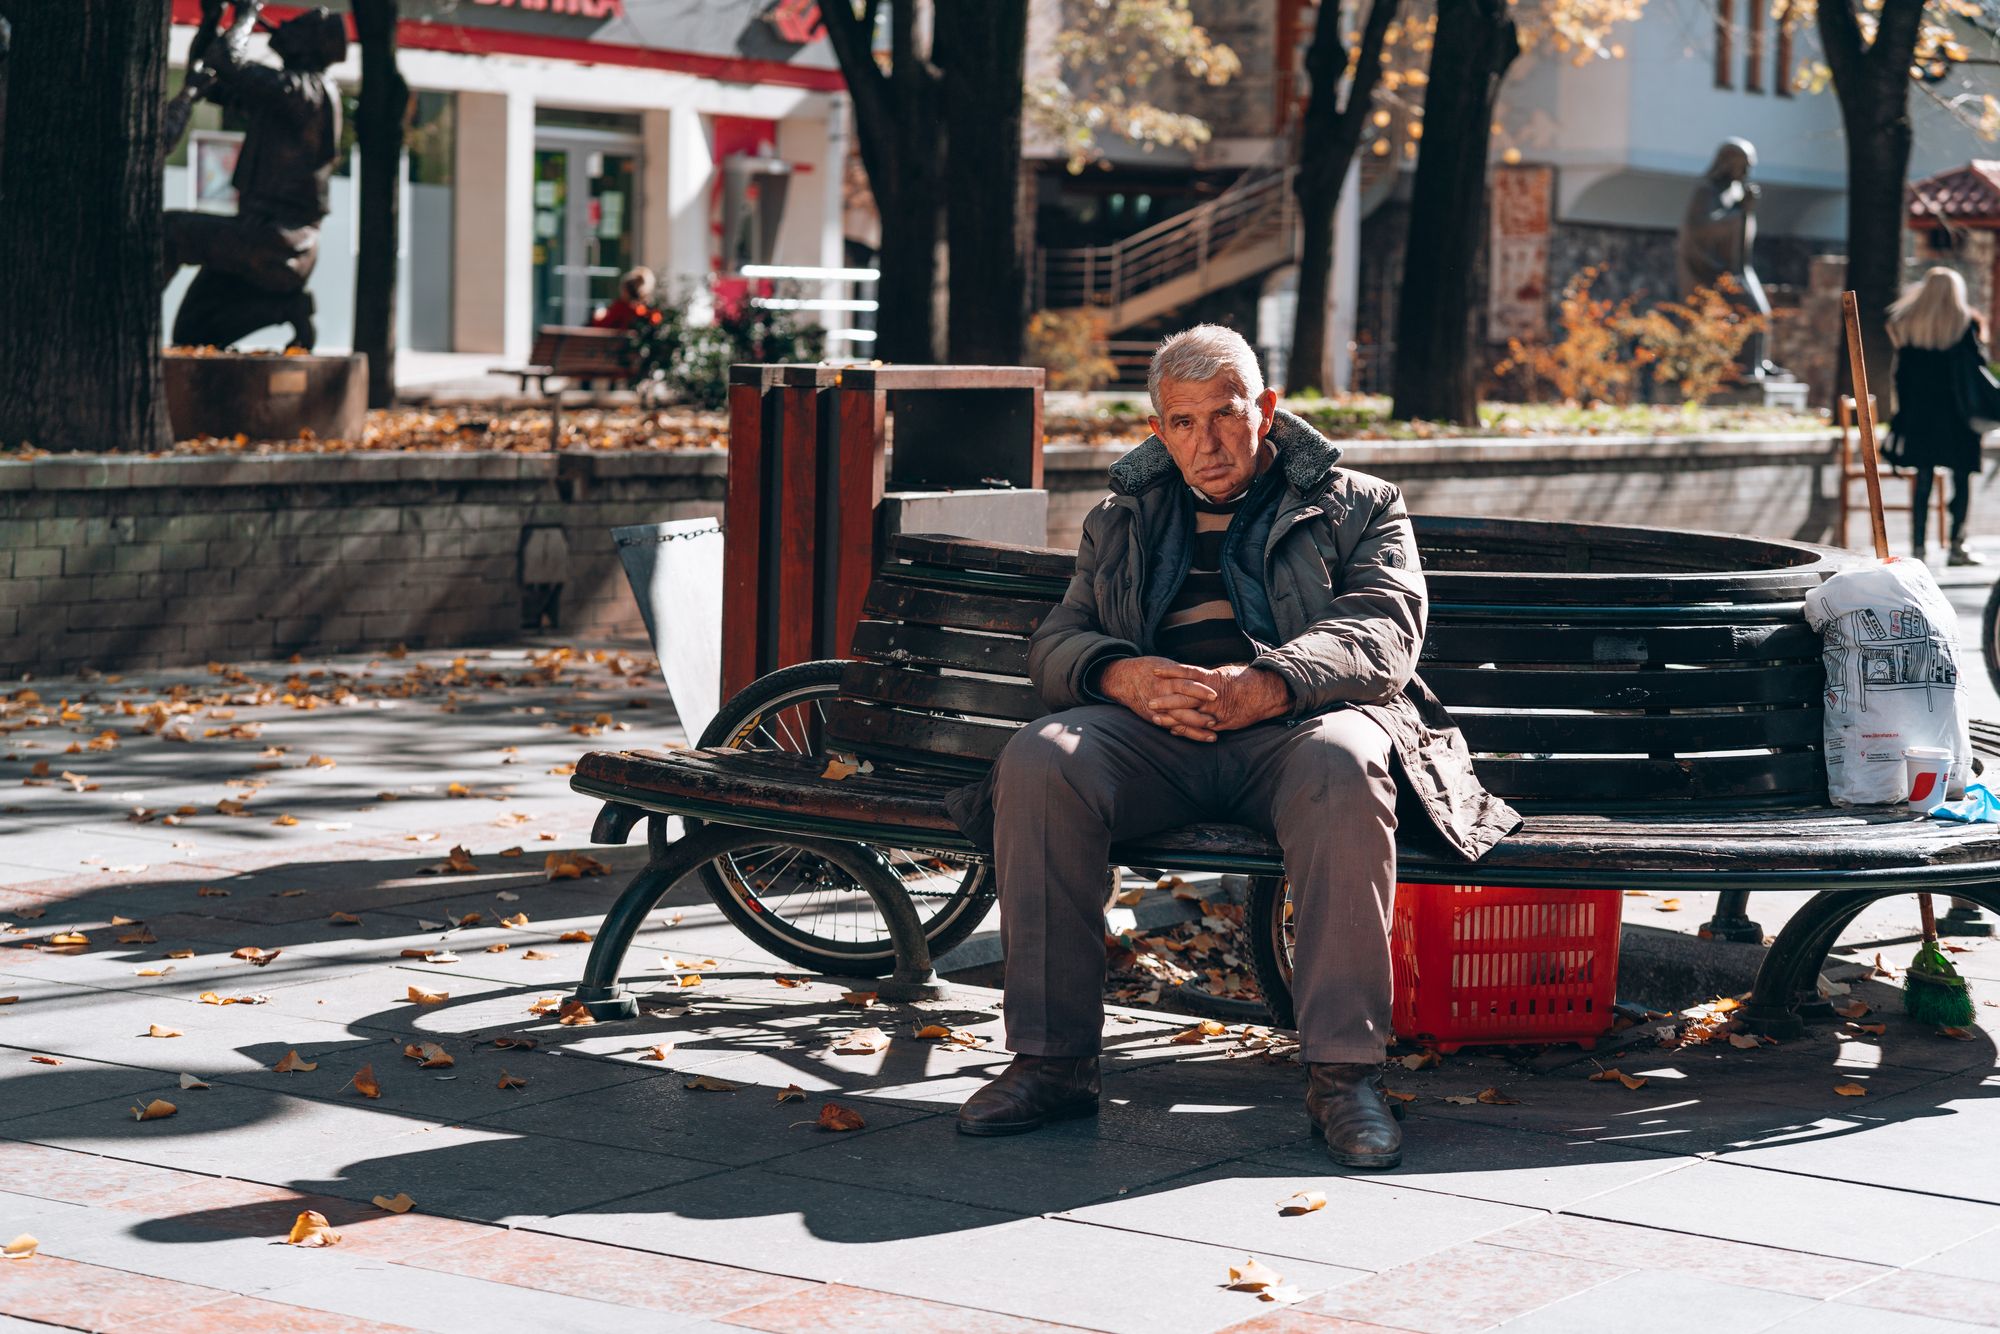 Photo by David Elikwu of old man on a bench looking into the camera. Taken in North Macedonia.